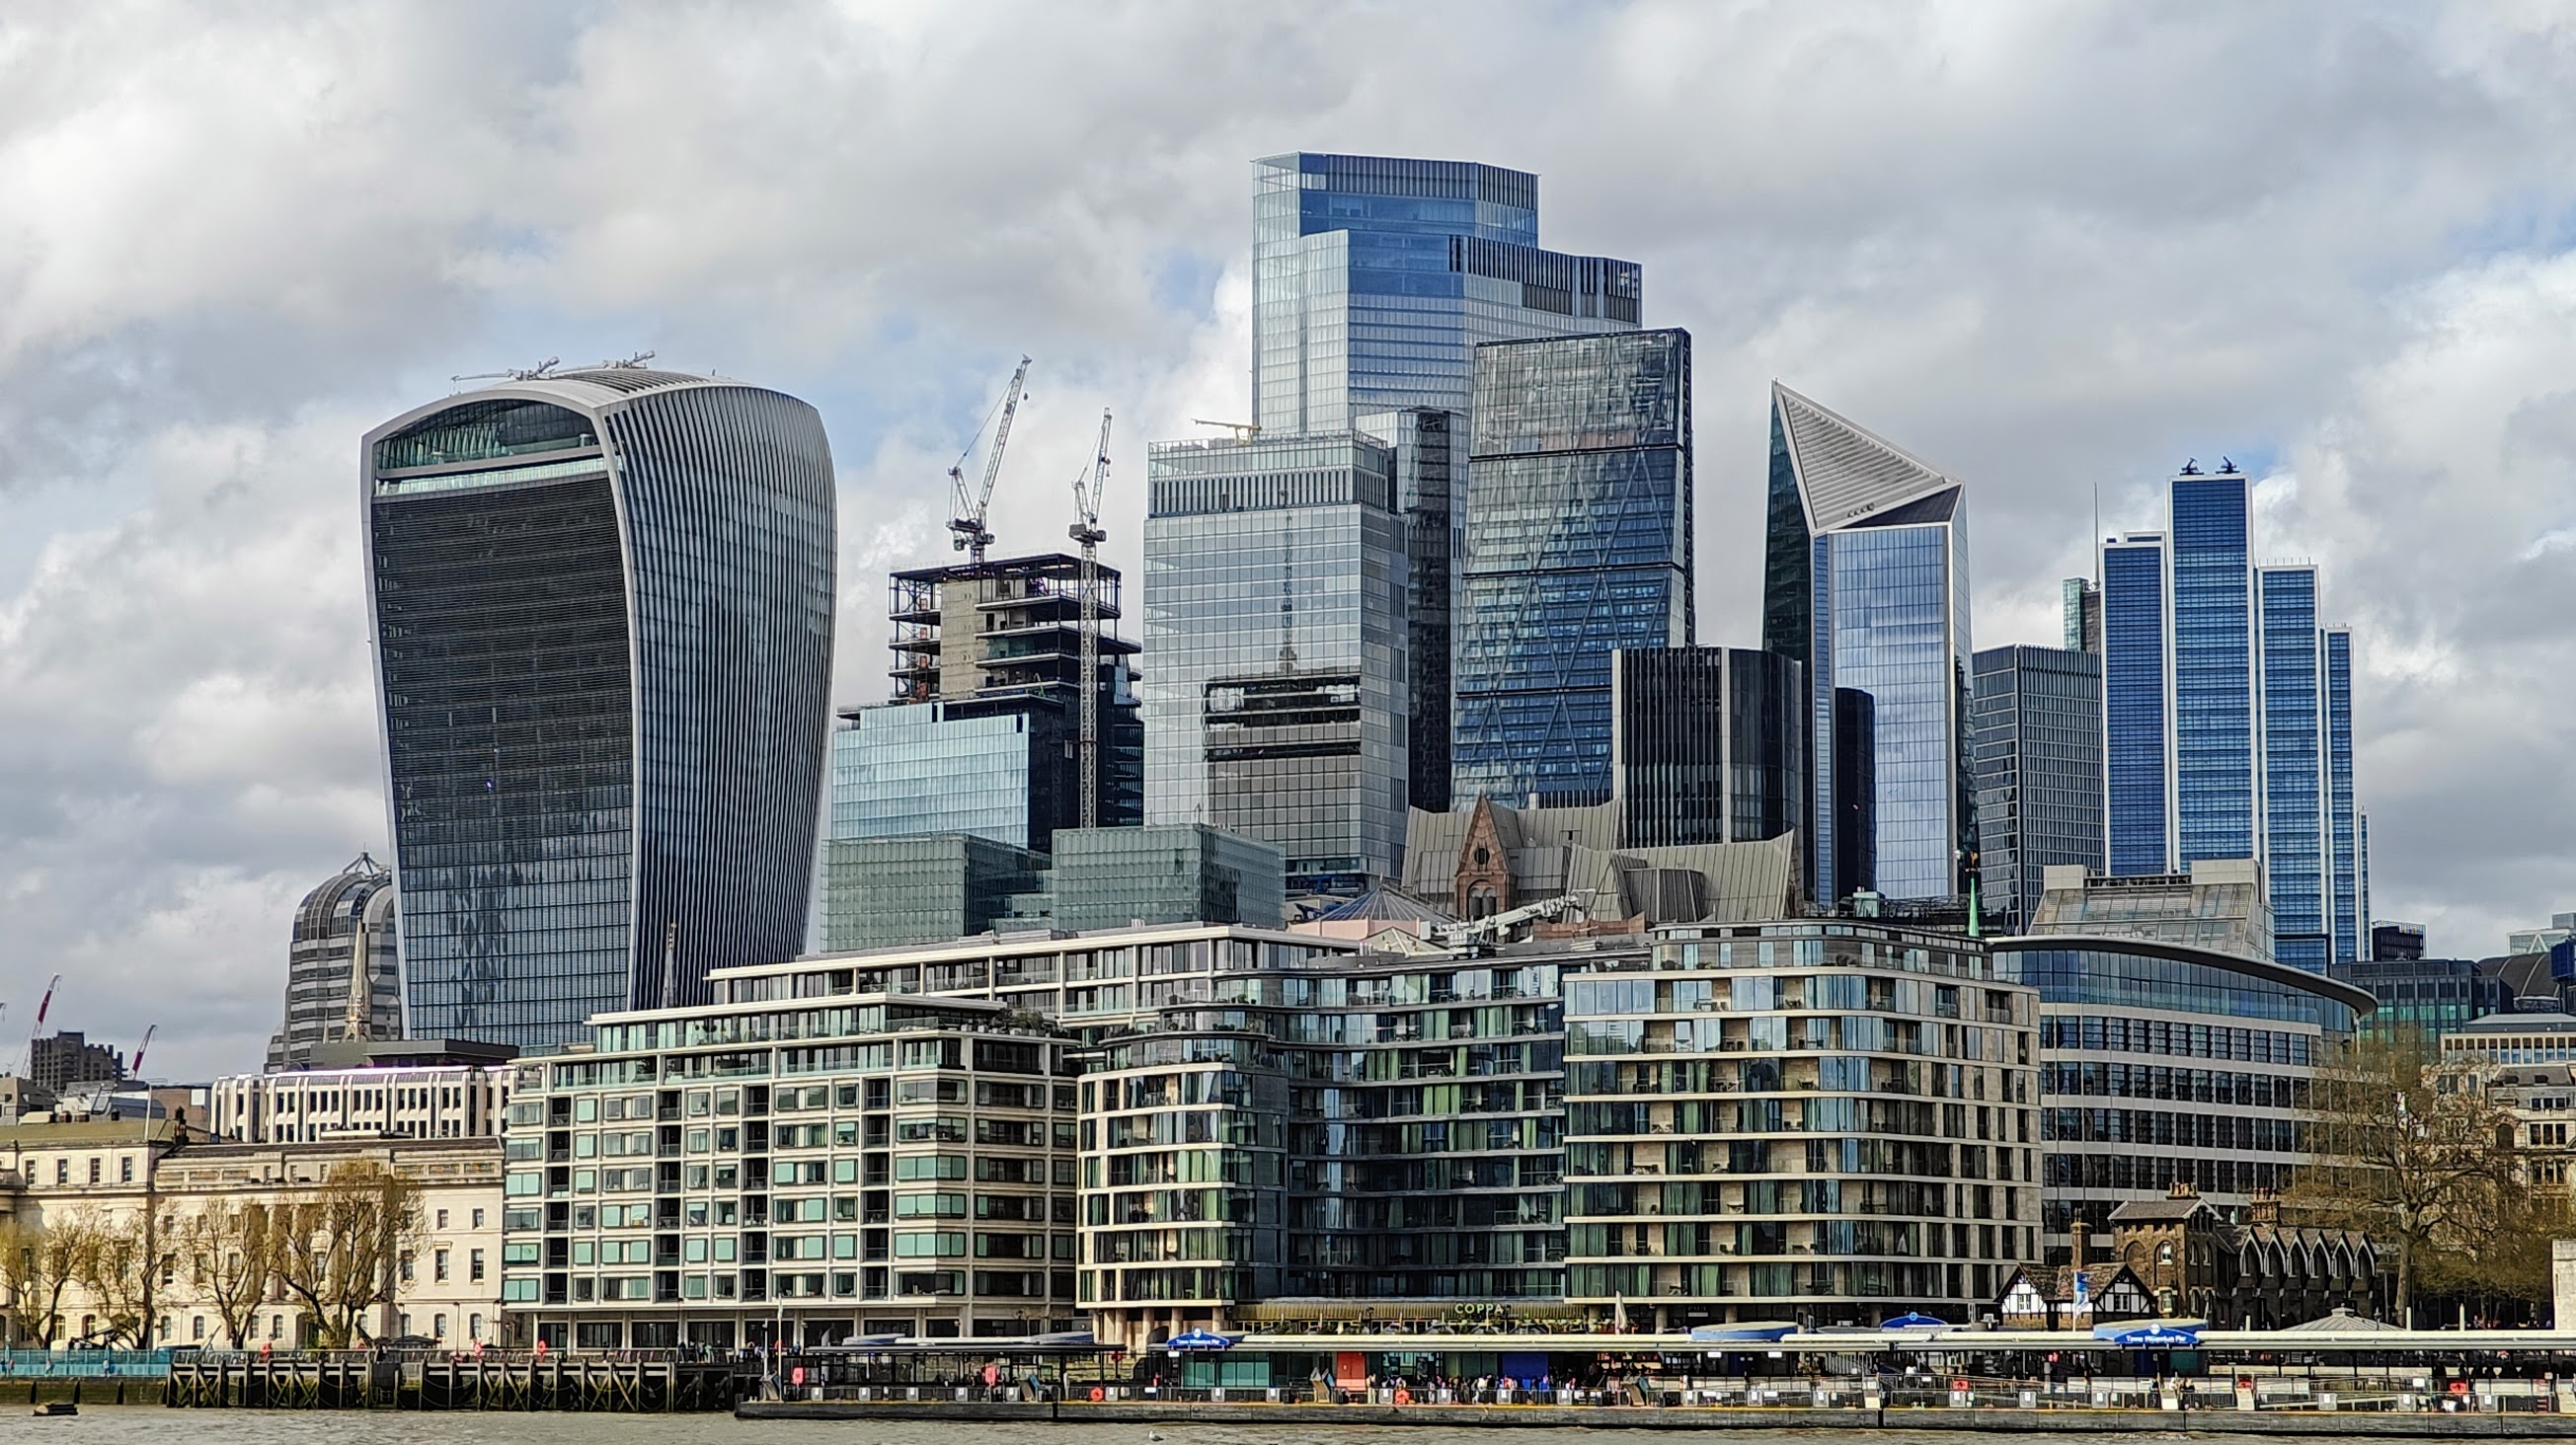 London city scape, showing off the curves and geometric angles of the skyscrapers